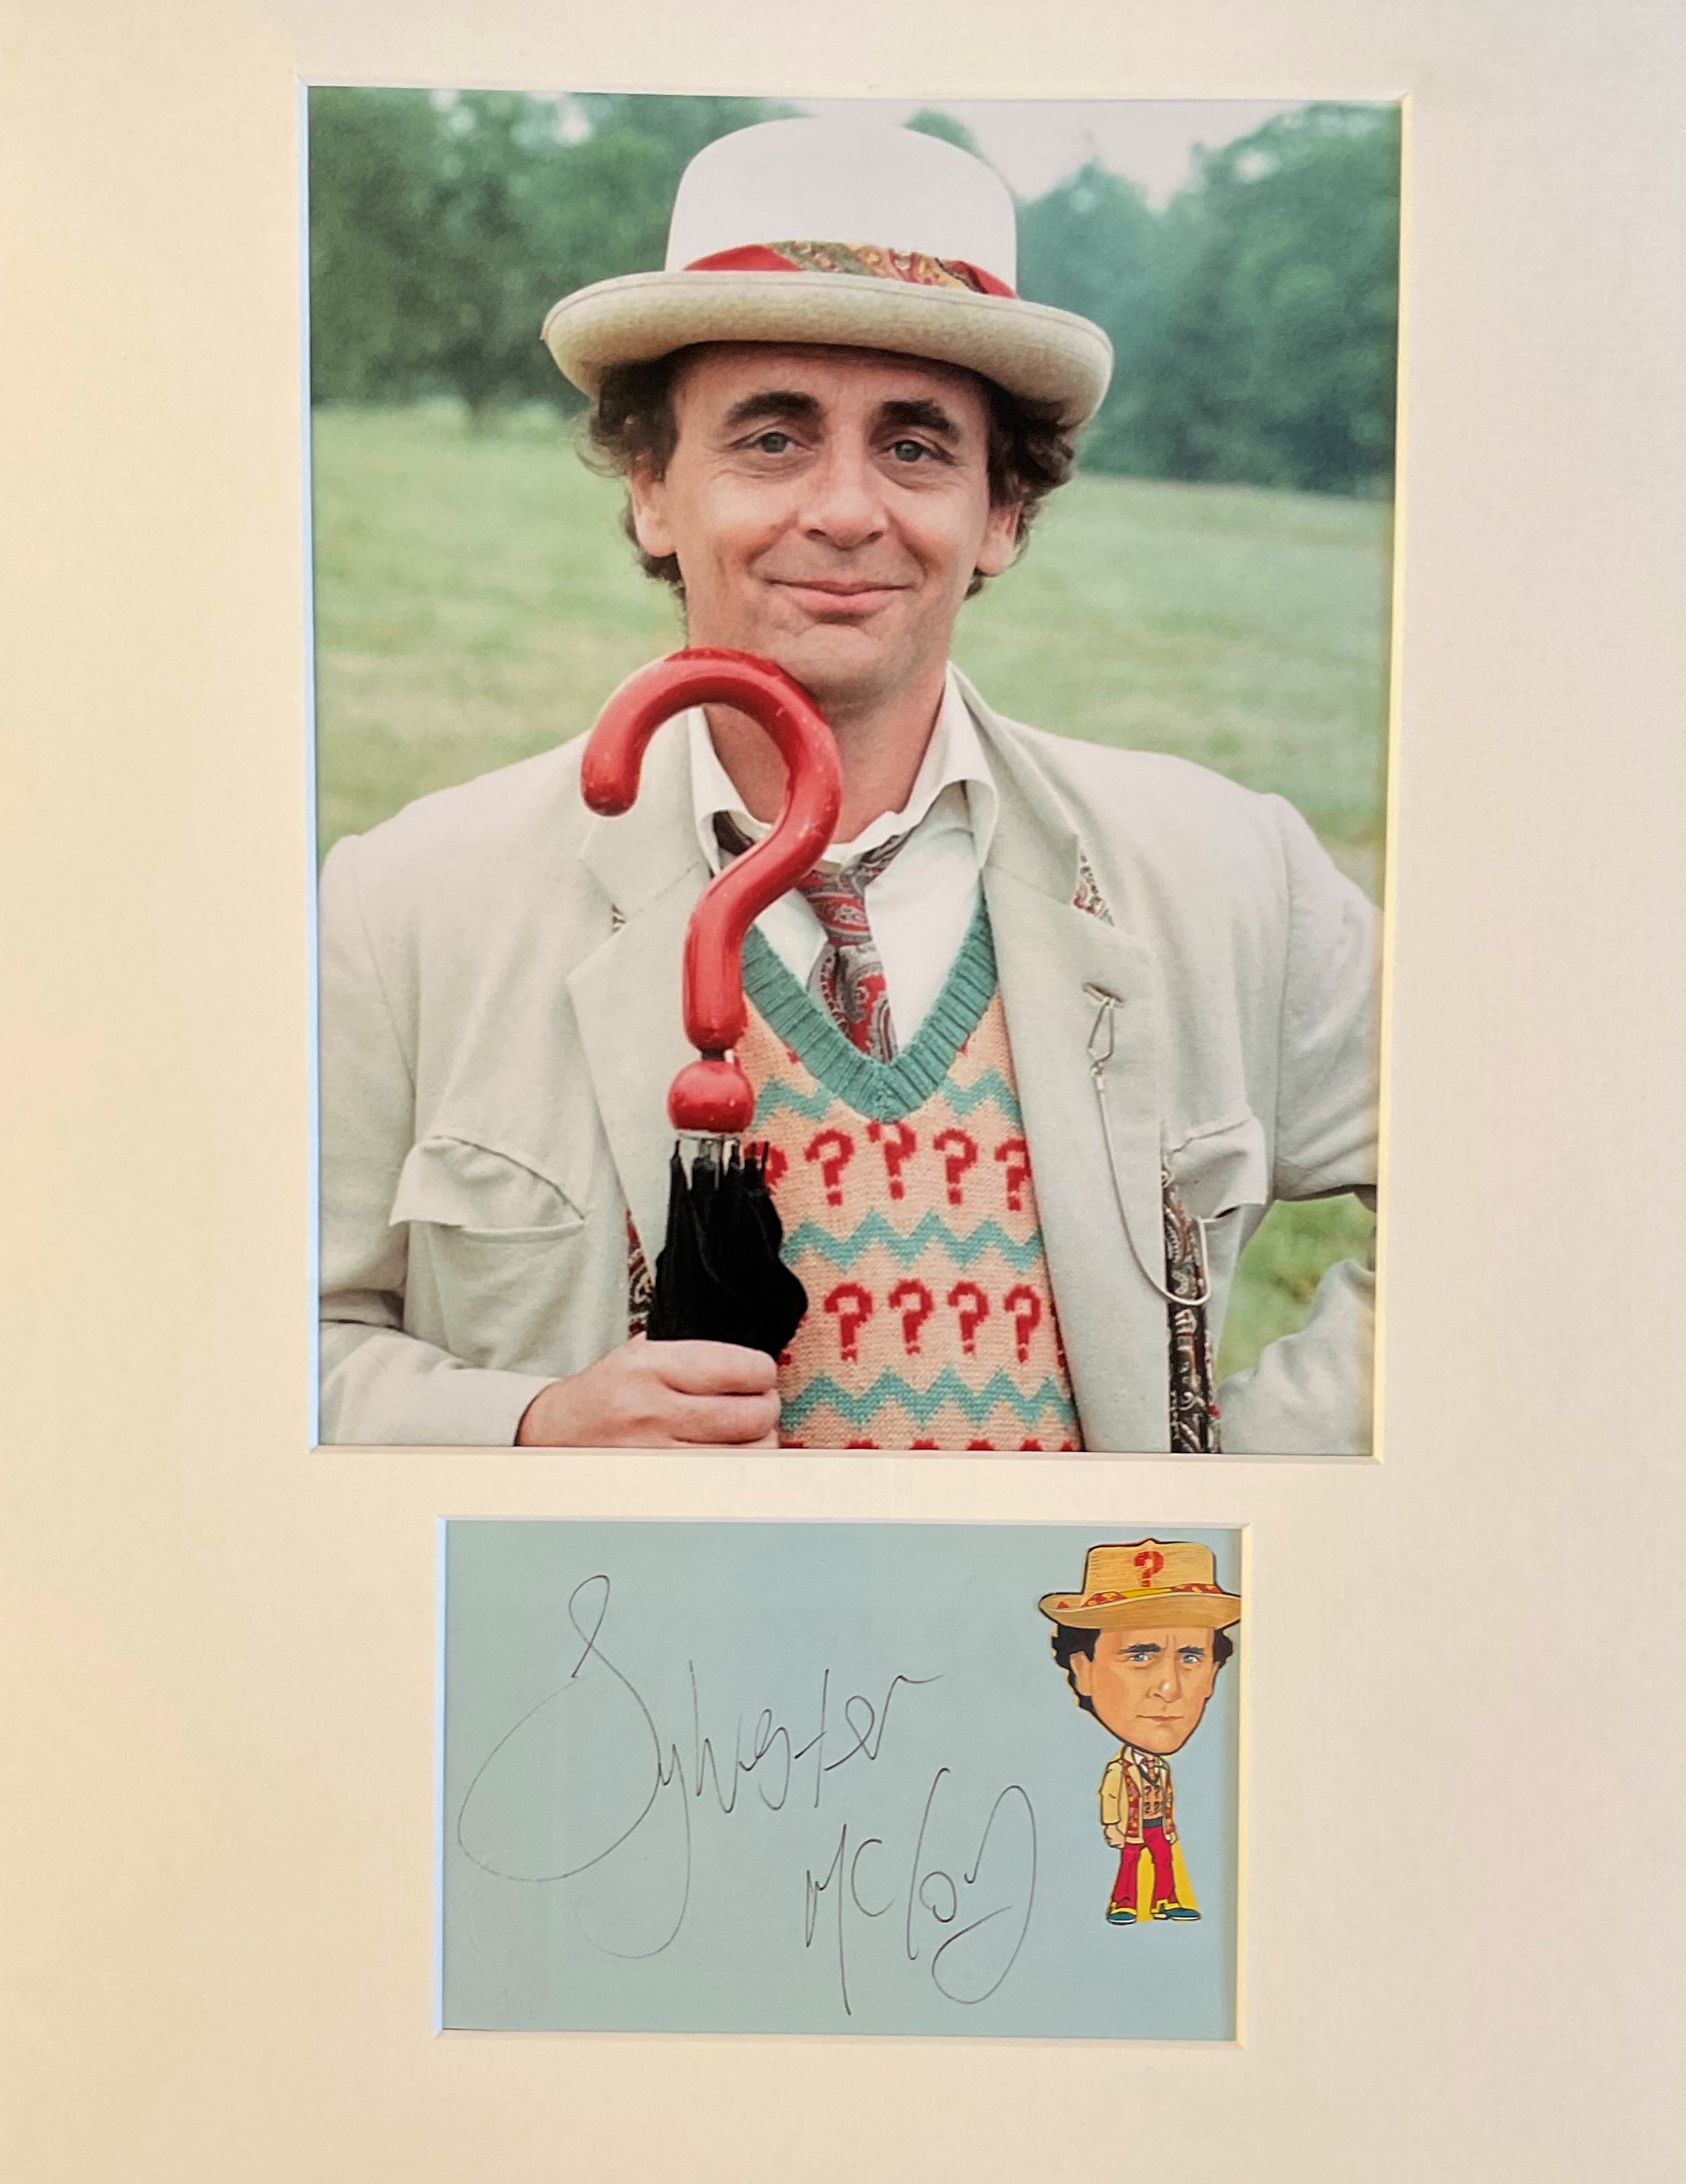 Dr Who. Sylvester McCoy Handsigned Signature Card with 10x8 Colour Photo, Matted with high Quality